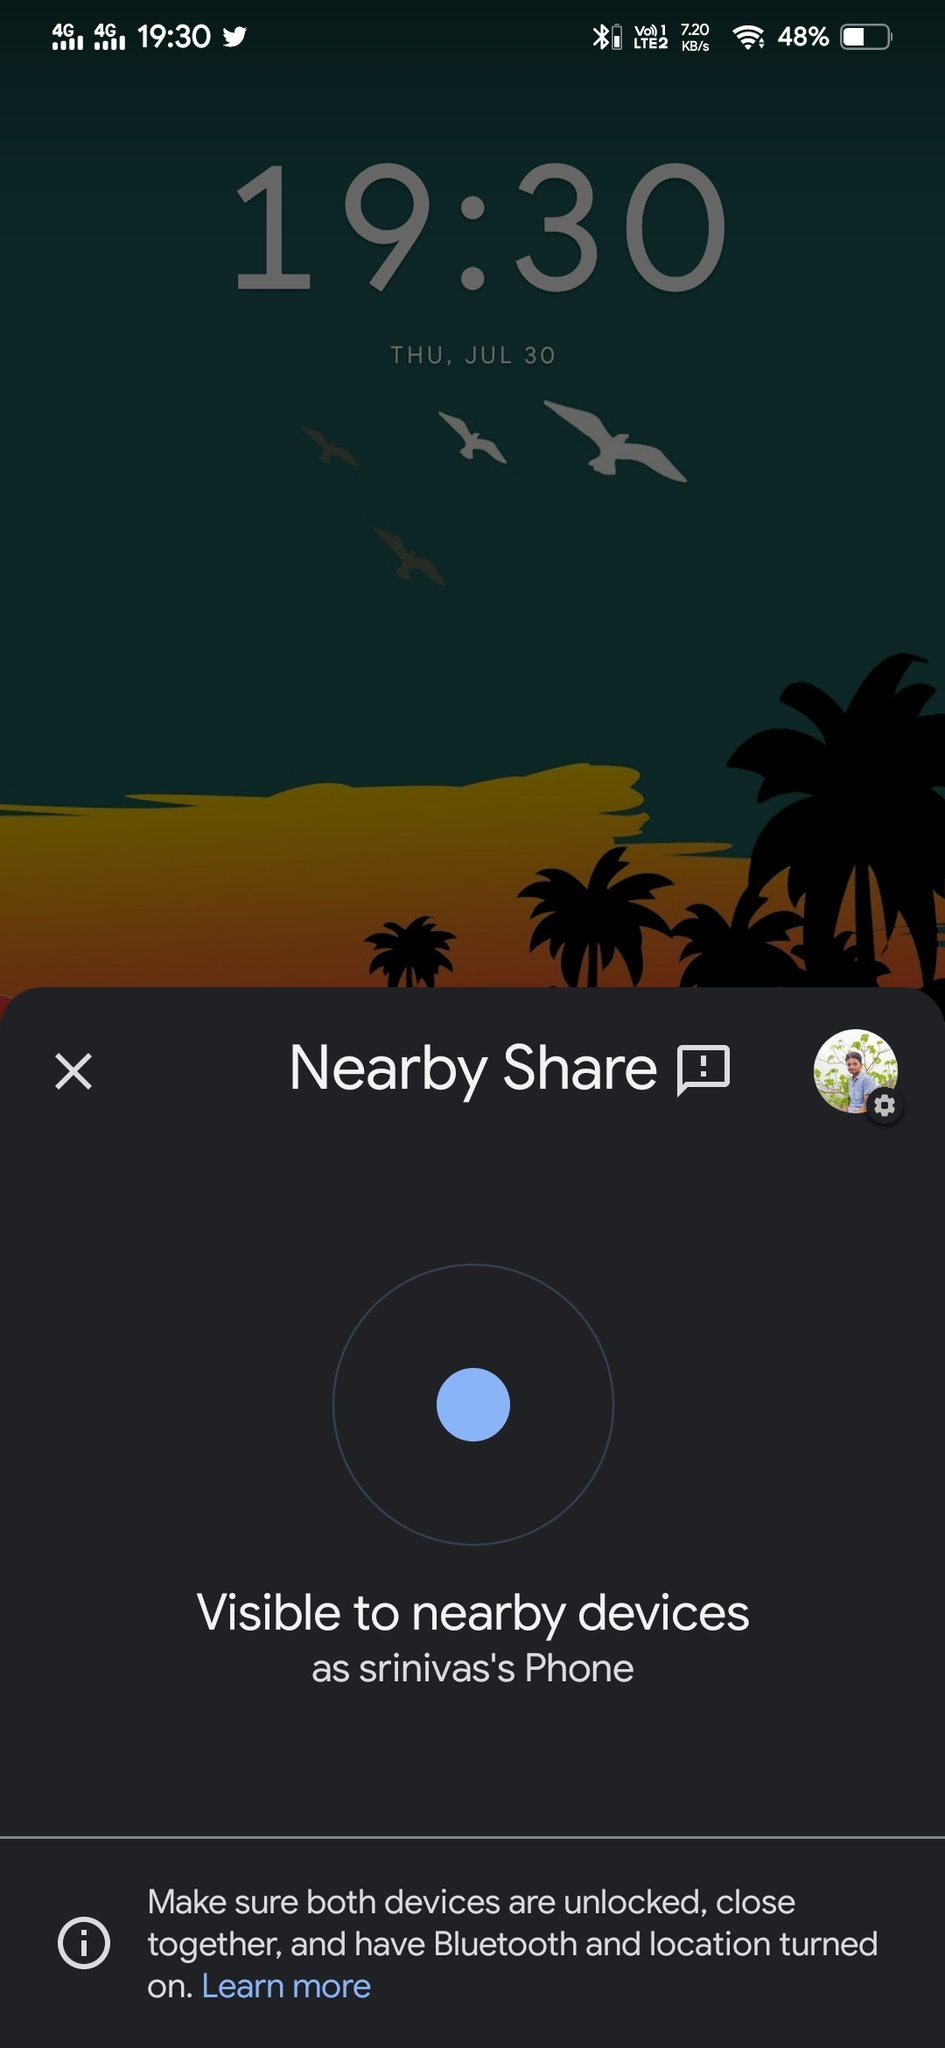 Android Nearby Share UI